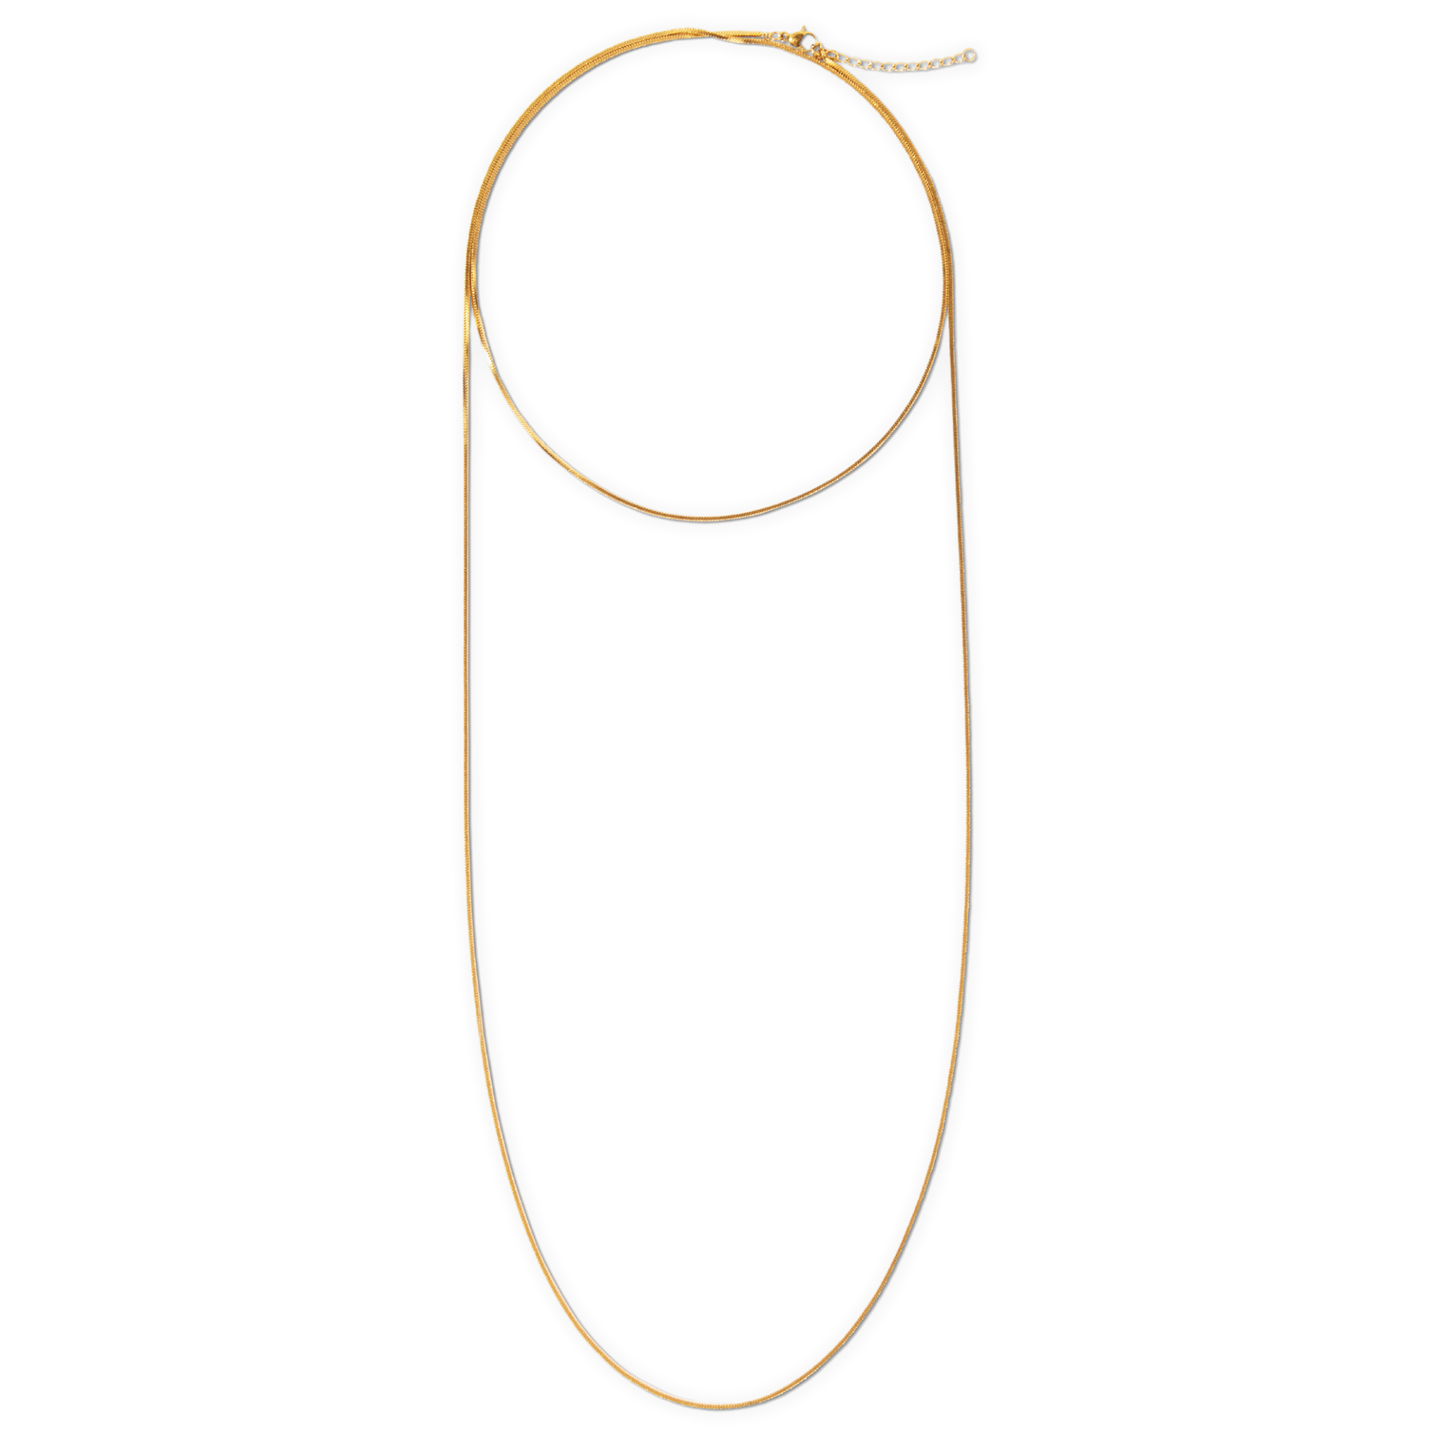 Ellie Vail - Palmer Wrap Snake Chain Necklace